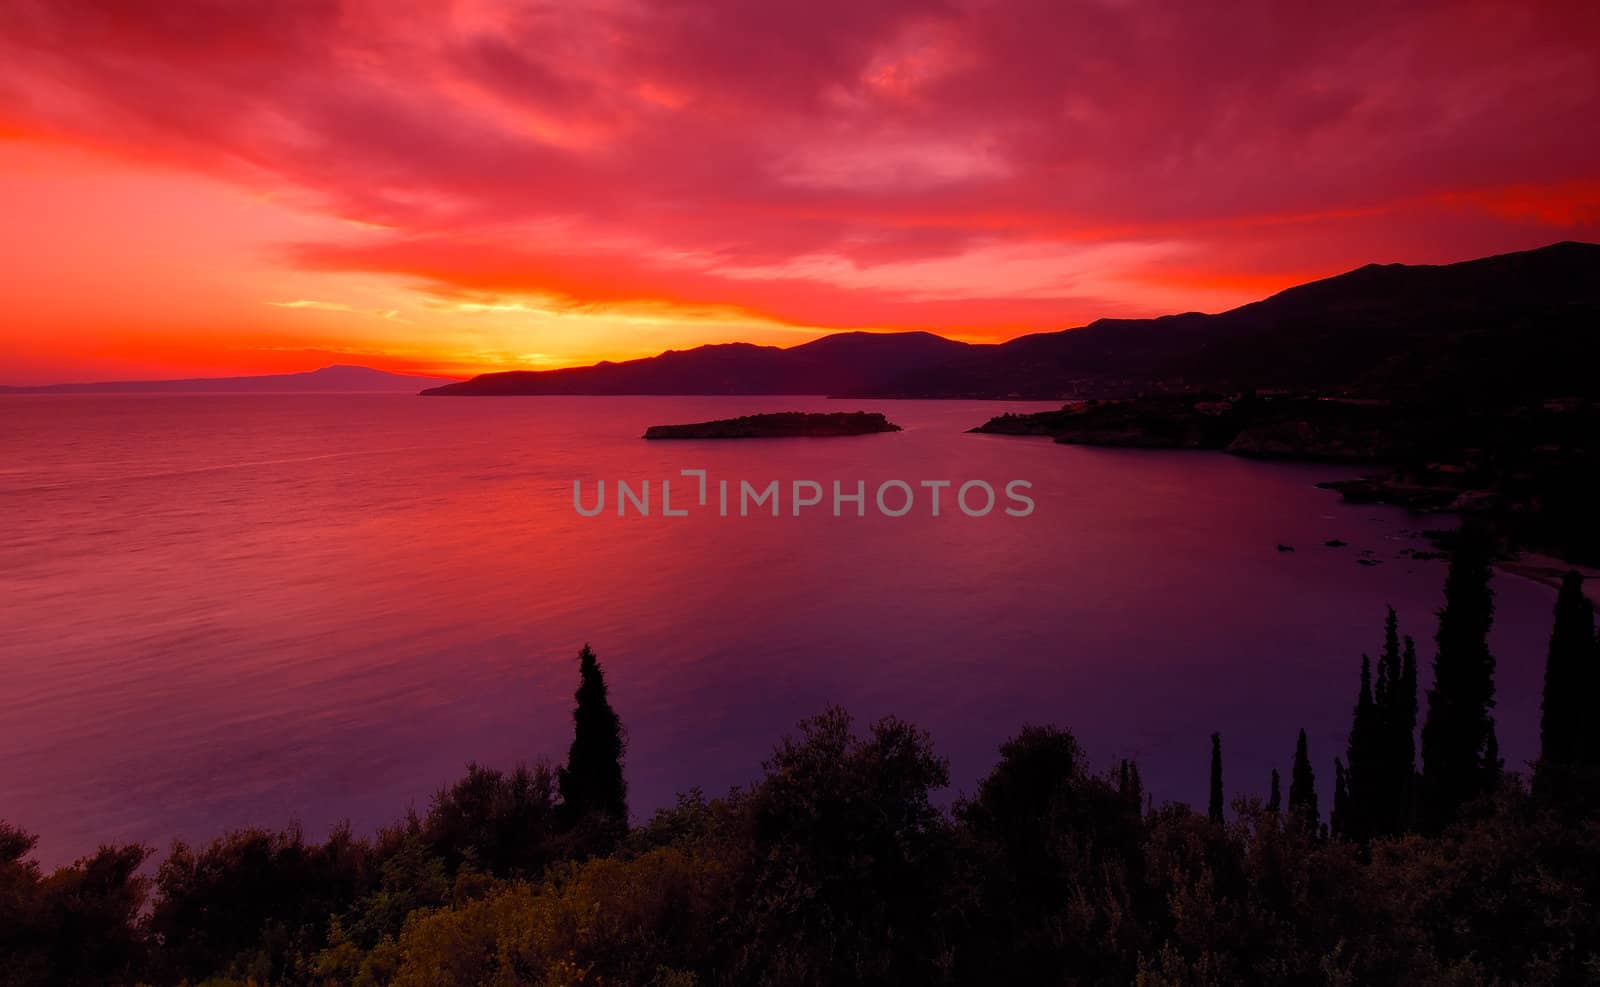 A spectacular sunset over the bay of Kardamili, southern Greece